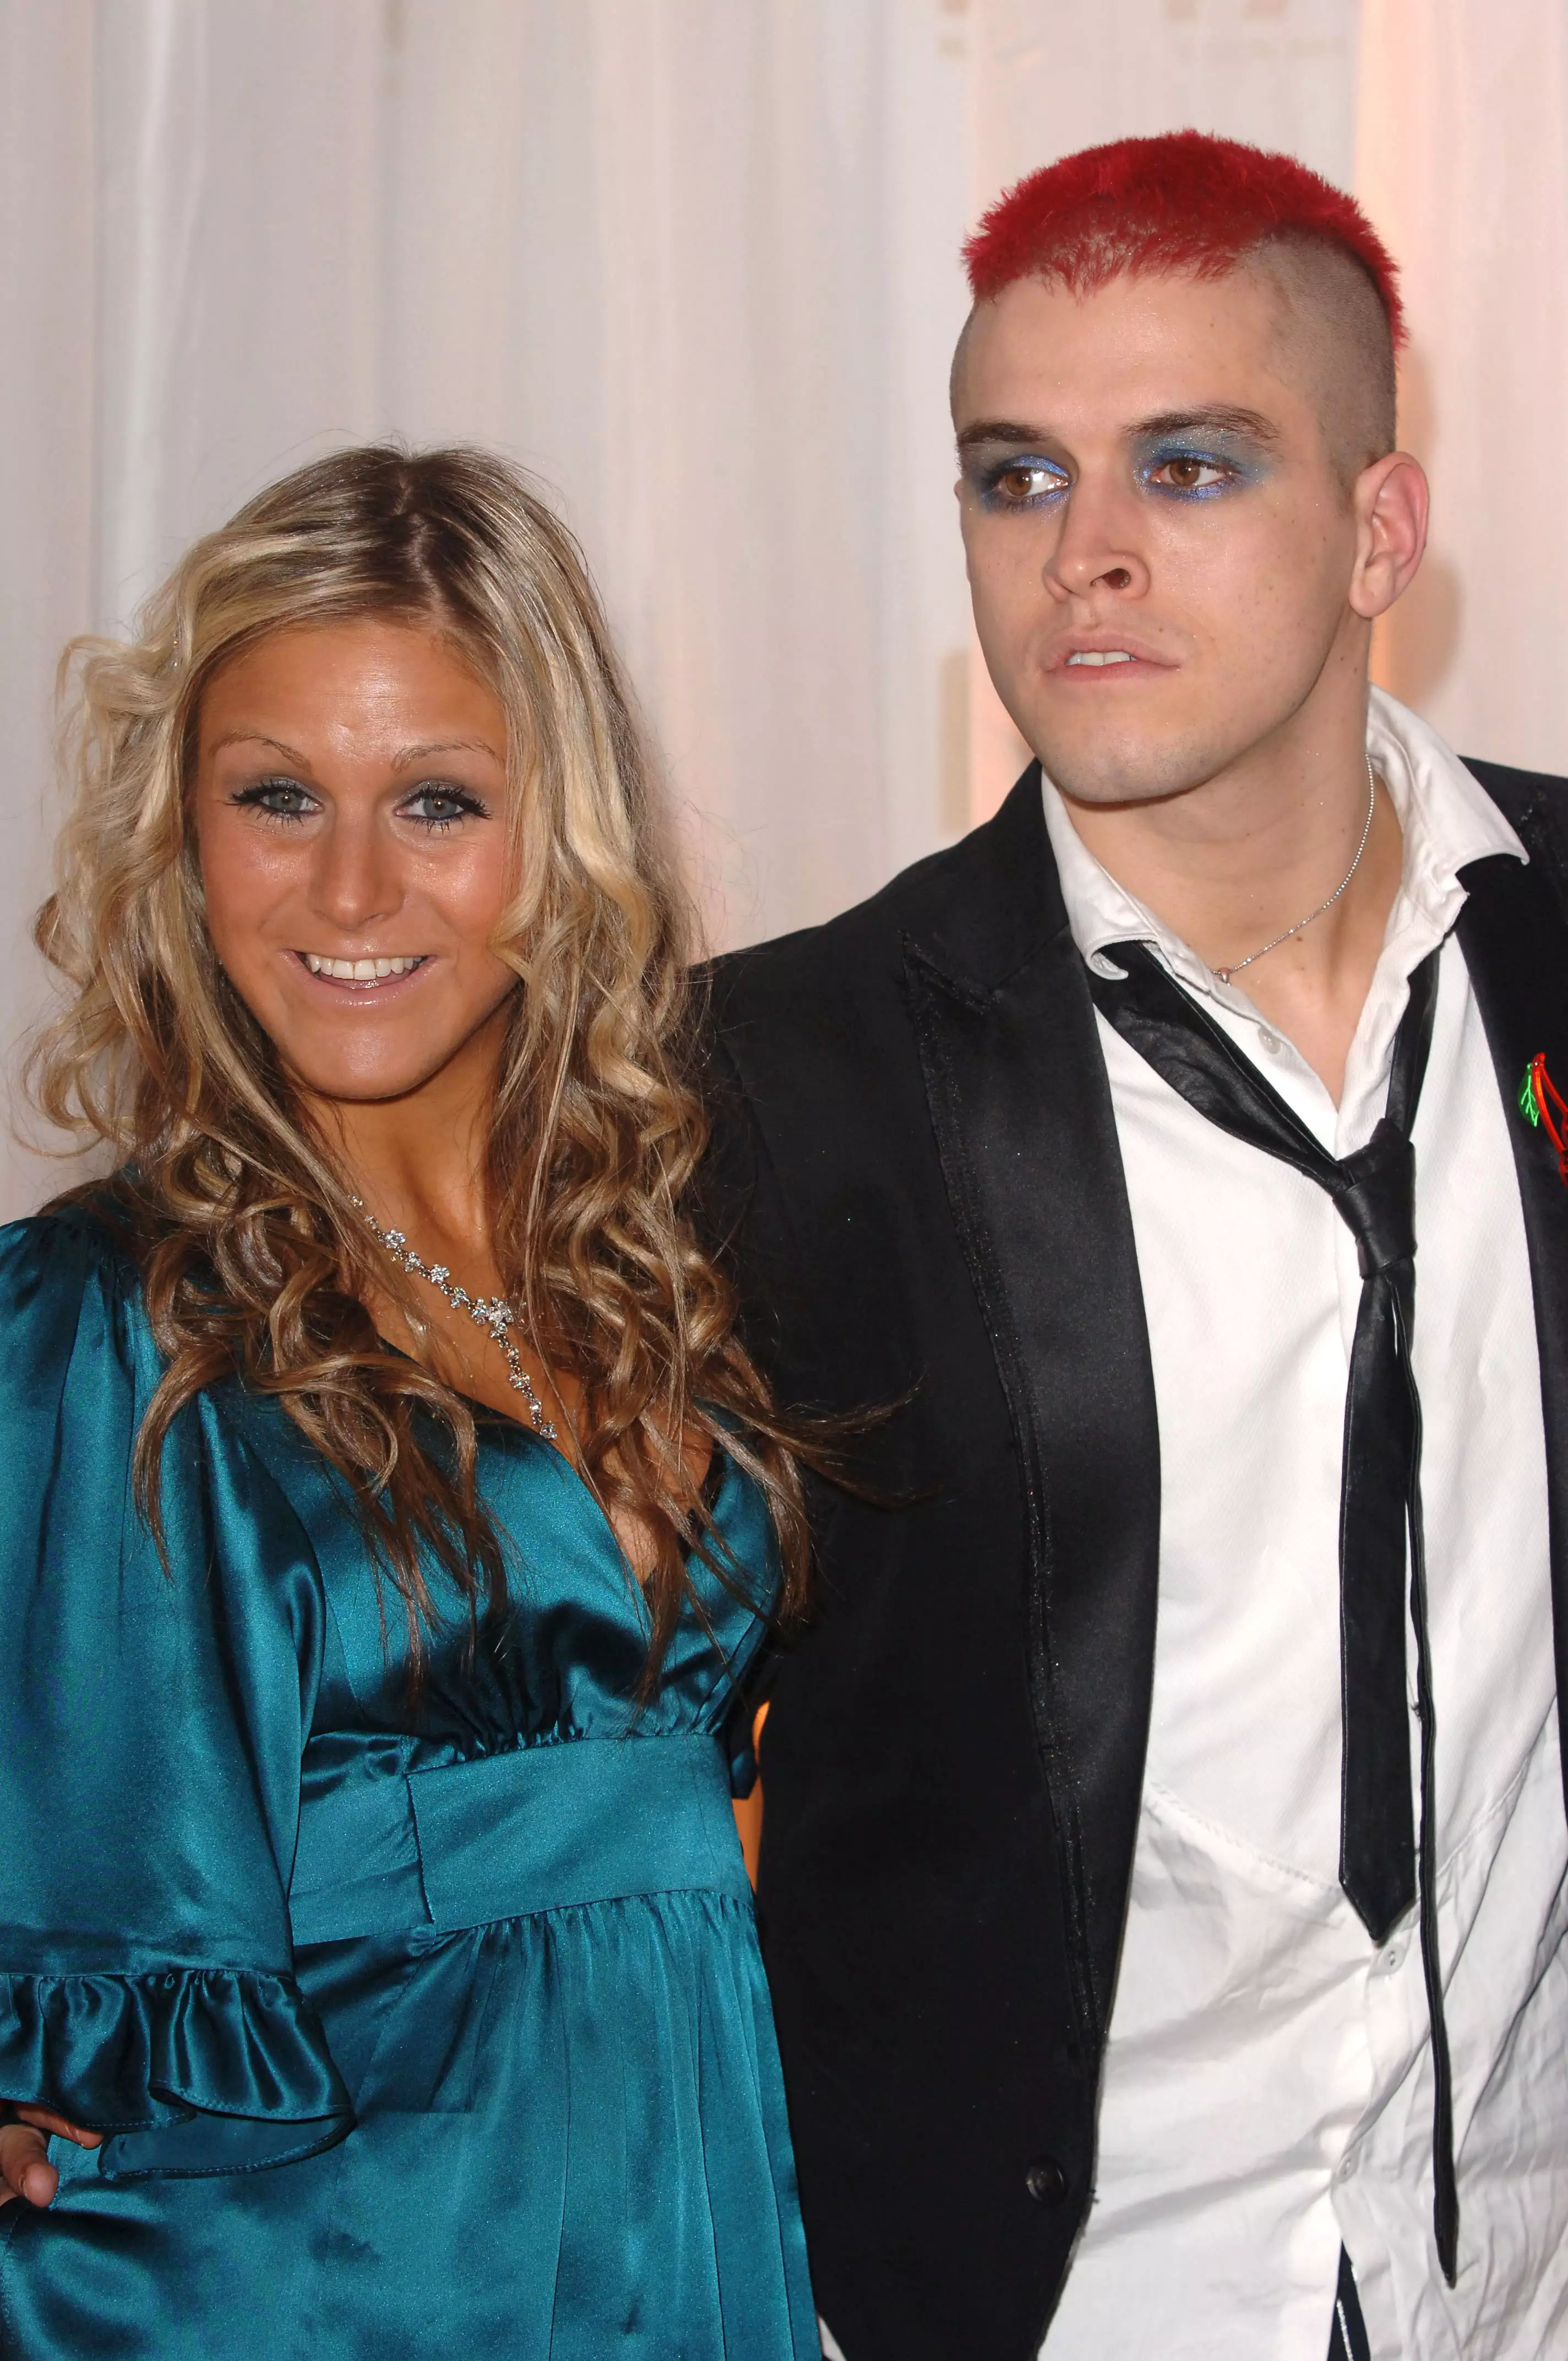 Pete Bennett has revealed the heartbreaking final text message he received from ex-girlfriend Nikki Grahame (